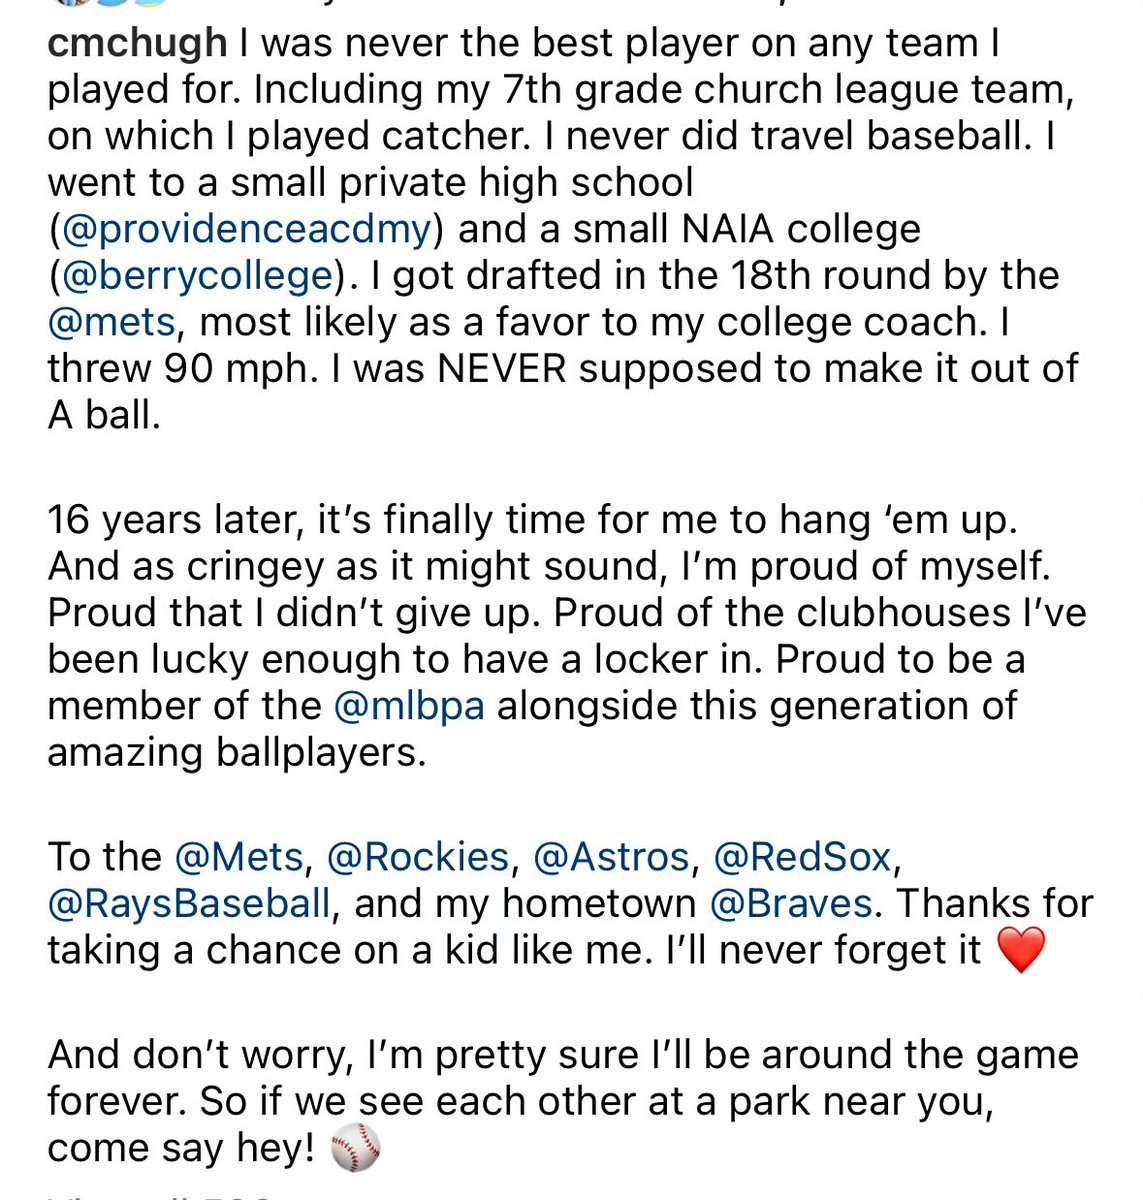 Collin McHugh announced his retirement on Instagram today. Of the athletes I’ve had a pleasure of covering, @Collin_McHugh is one of my all-time favorites. Humble, kind, & generous with his time. He also may have my favorite story. 🧵